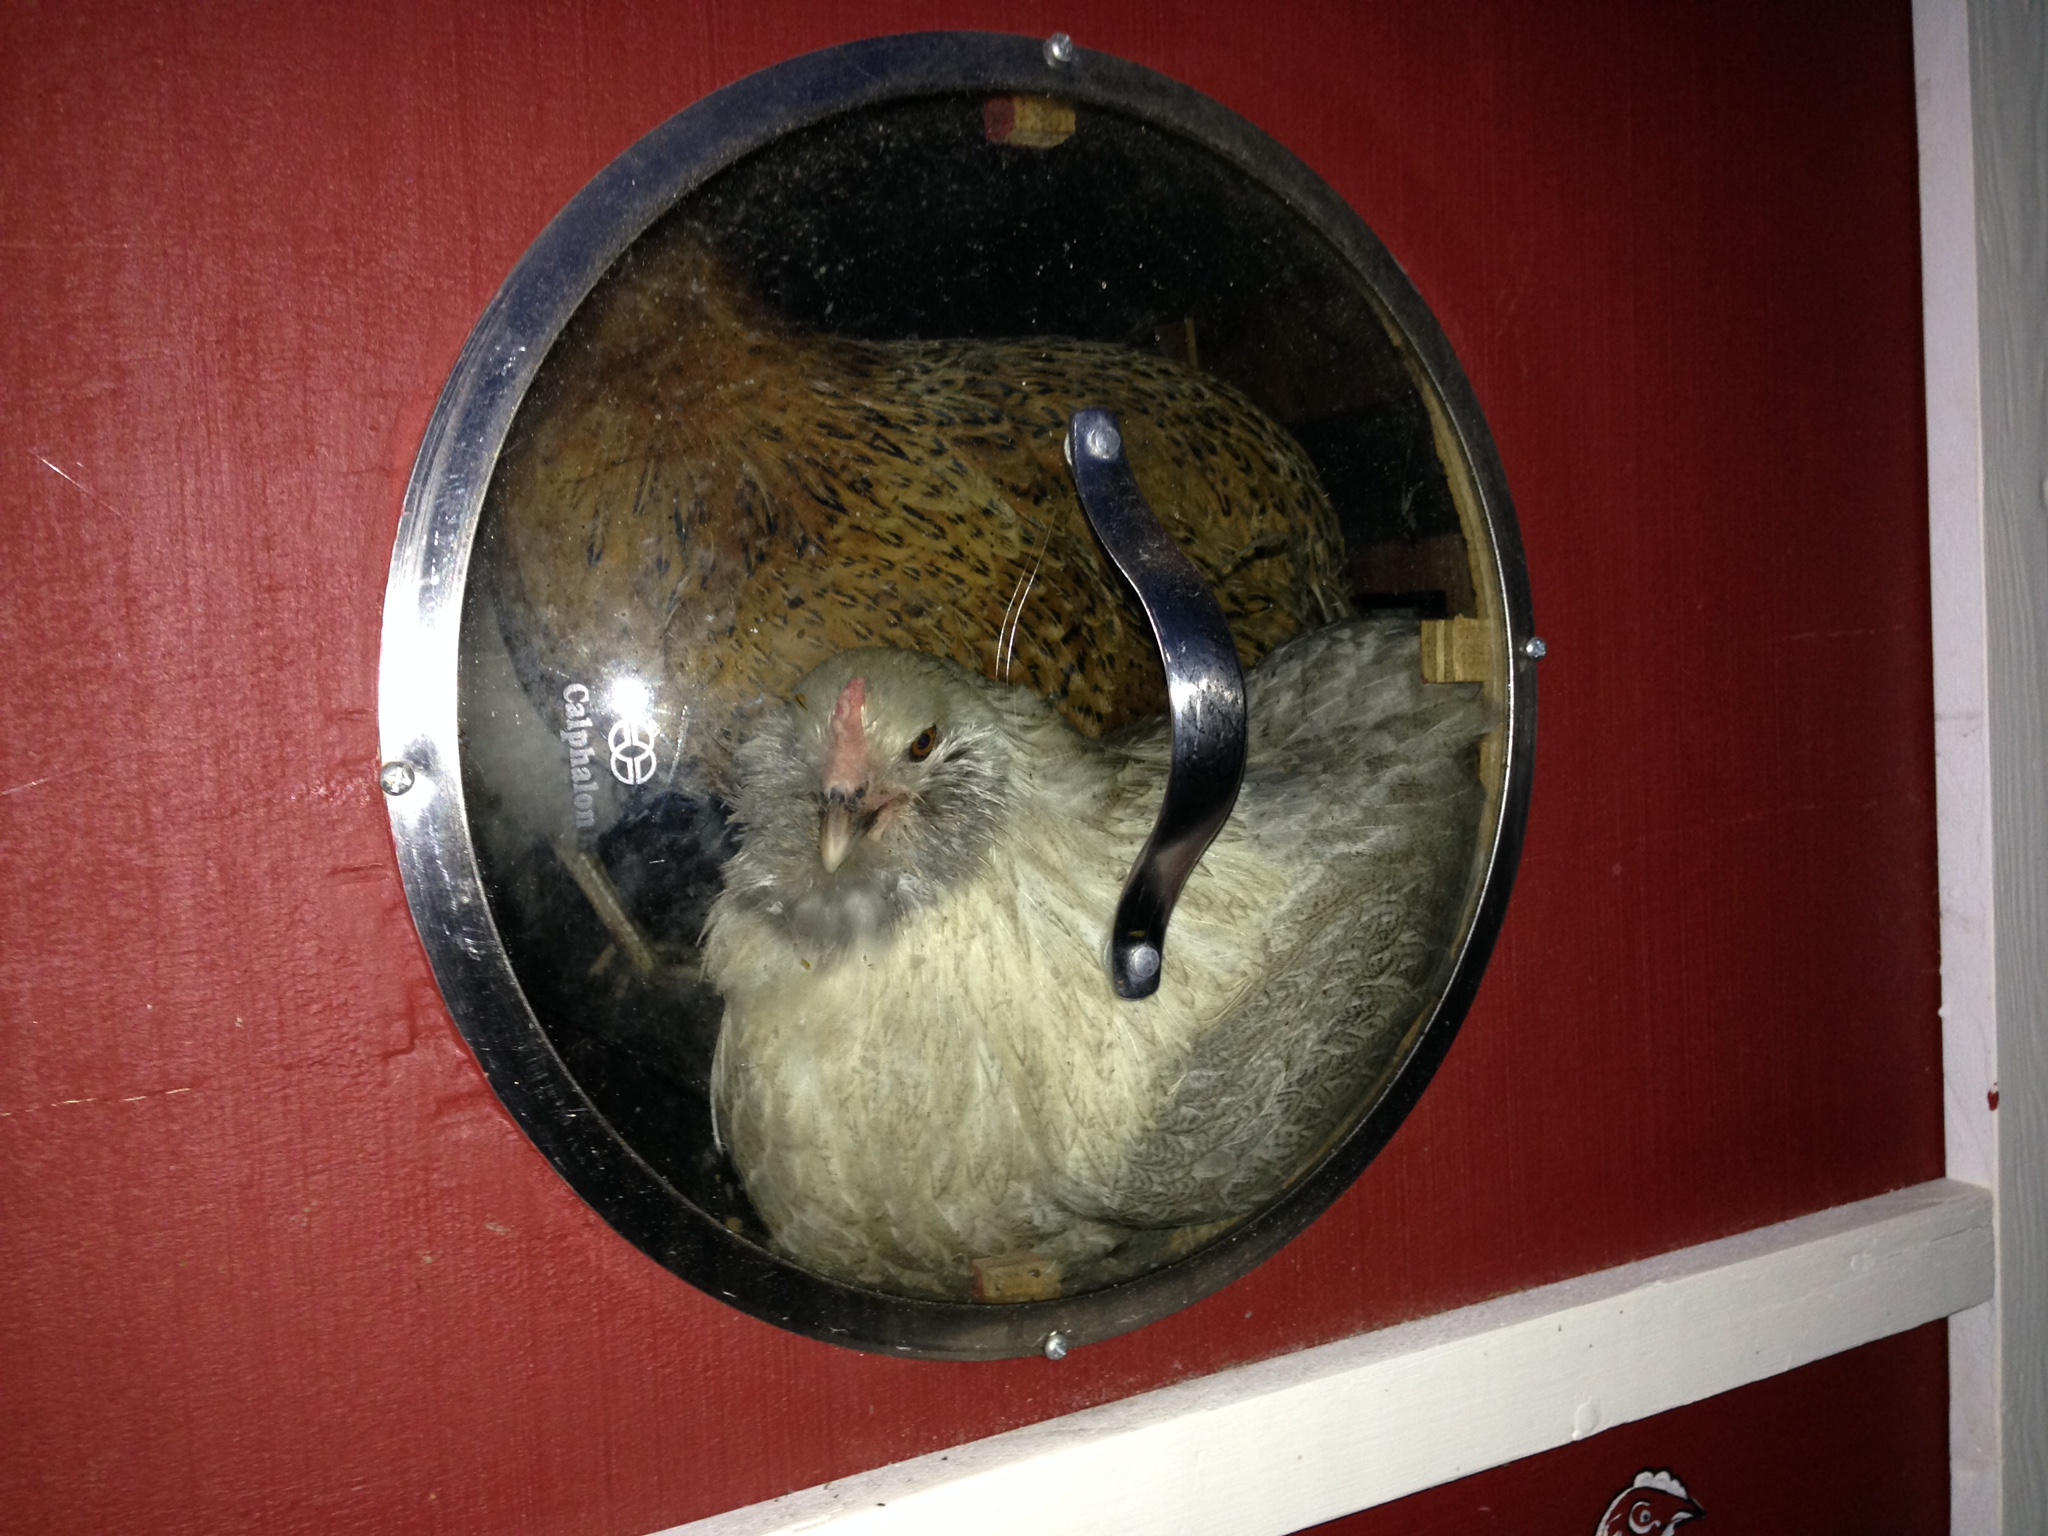 The new 4x4 coop has two round windows, one at either end of one of the two roosts. Here's Deedee enjoying the window seat!